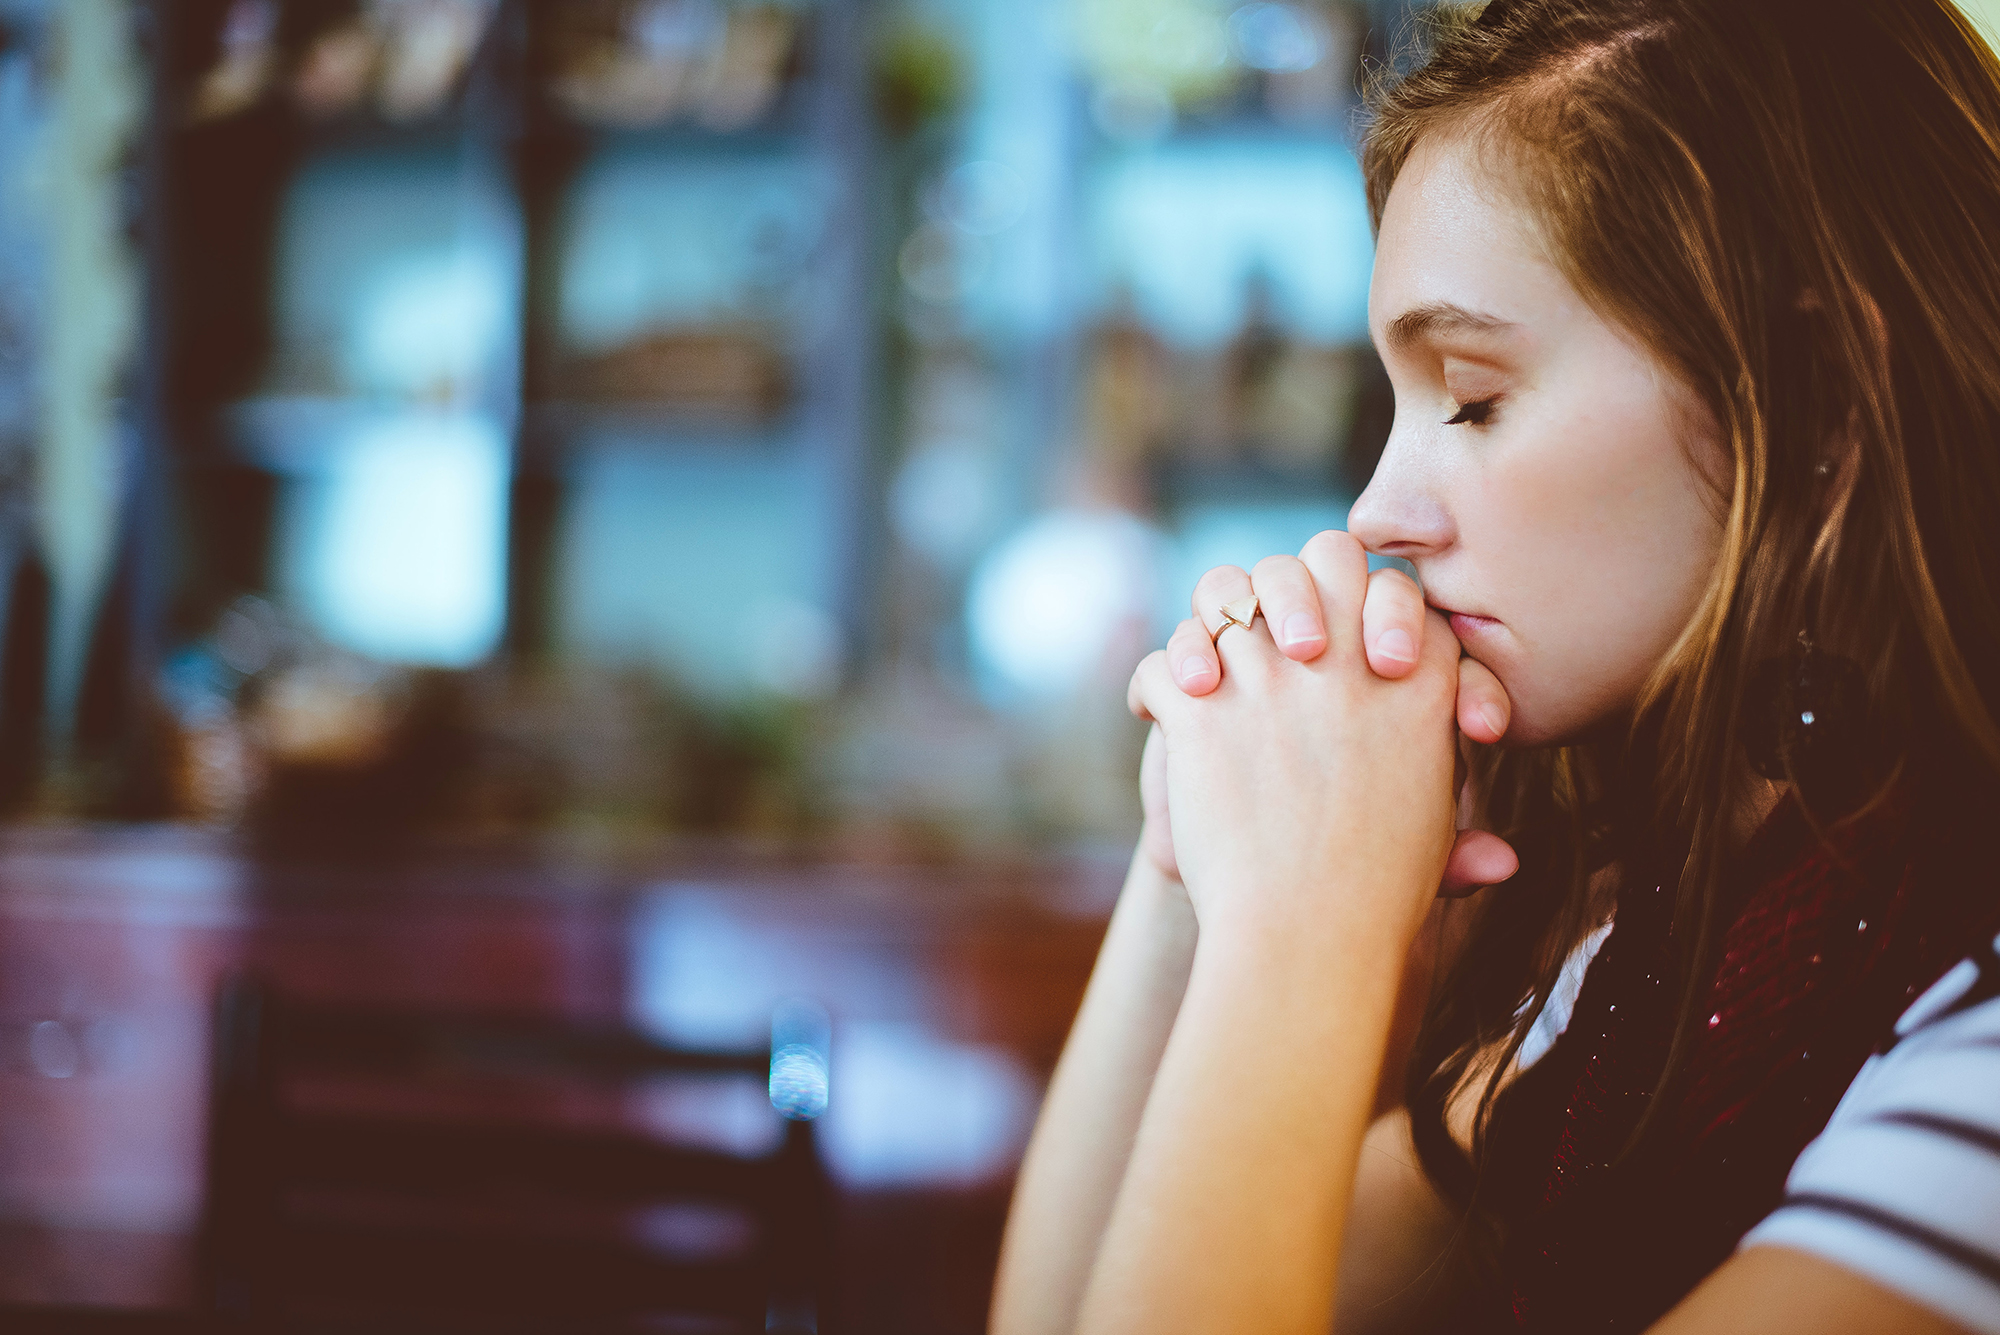 A Girl sits and prays with her eyes closed